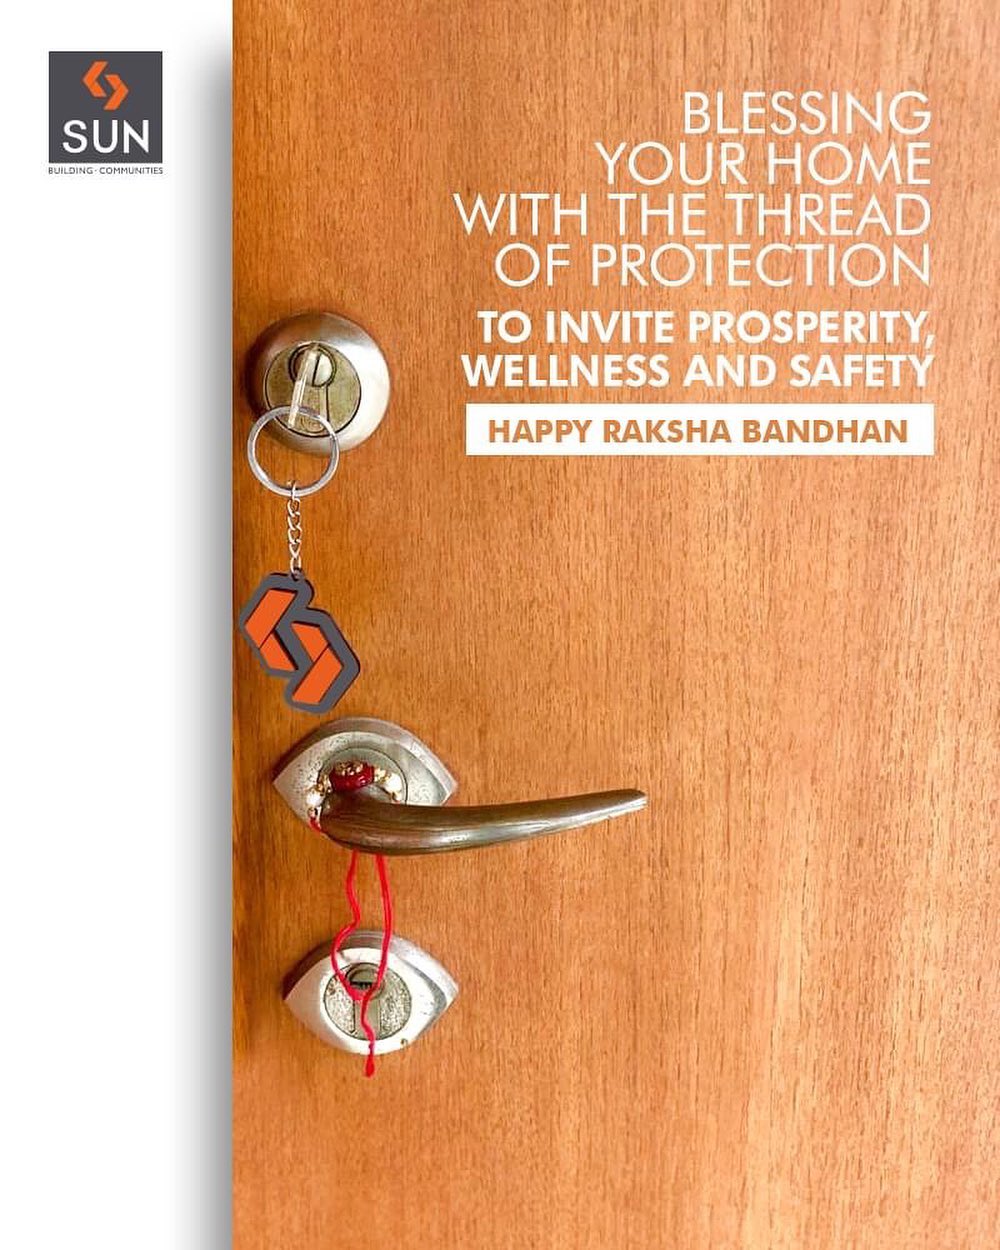 We believe in the absolute bond of our customer's trust and we reciprocate by ensuring protected homes where you can Live happily, Share the love and Cherish the memories forever.

#HappyRakhshaBandhan #Ahmedabad #SunBuildersGroup #Gujarat #RealEstate #SunBuilders